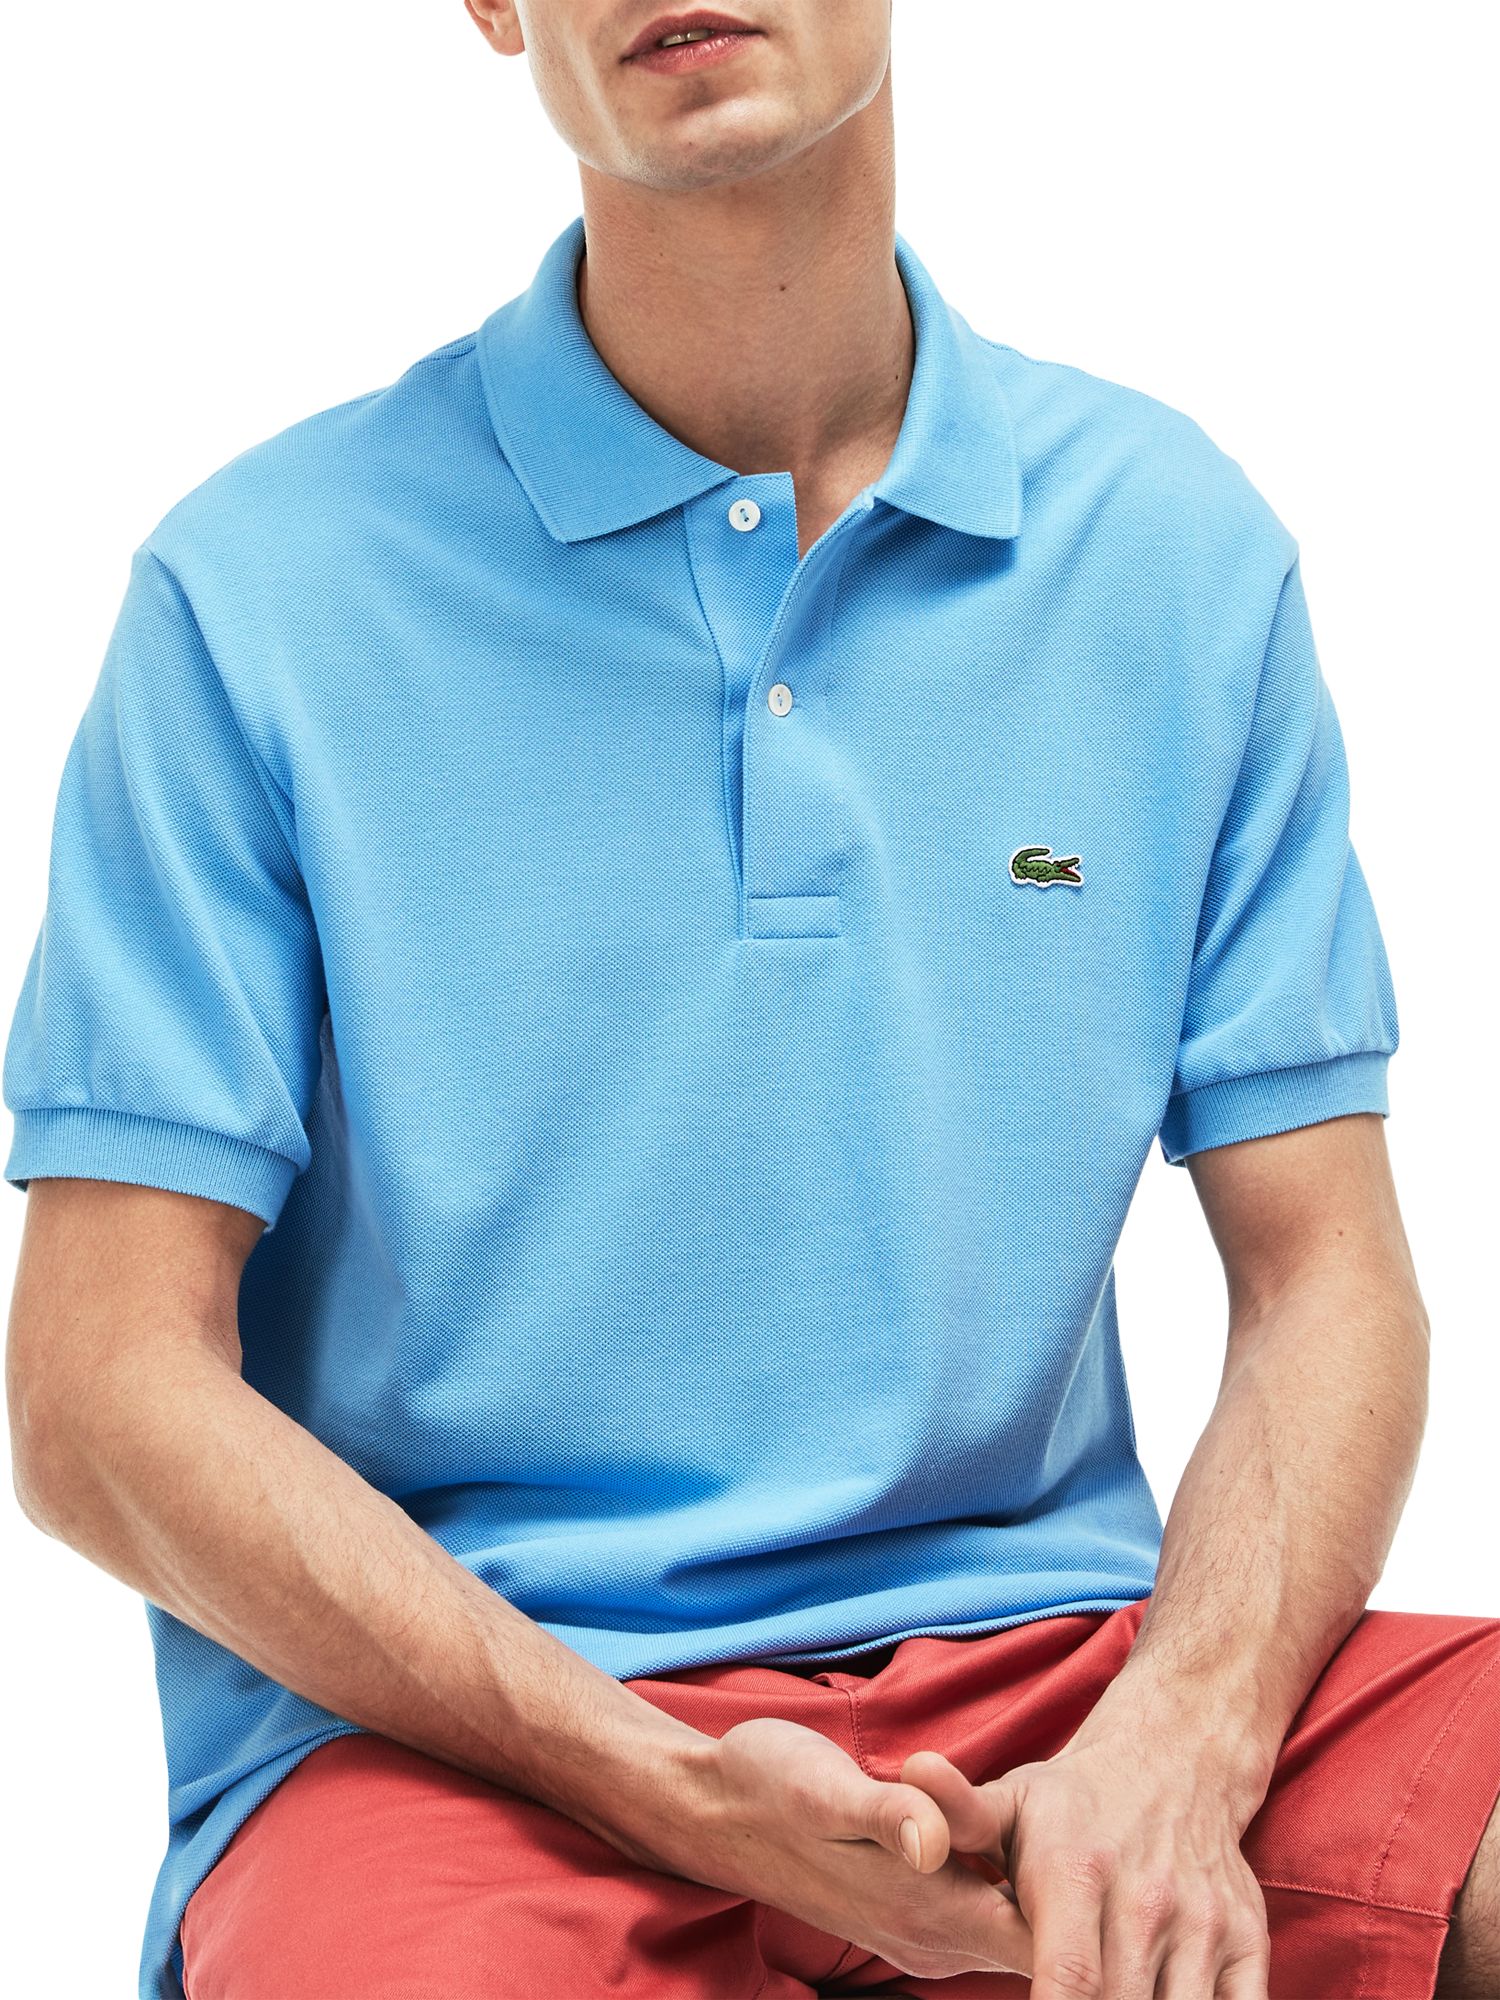 baby blue lacoste t shirt